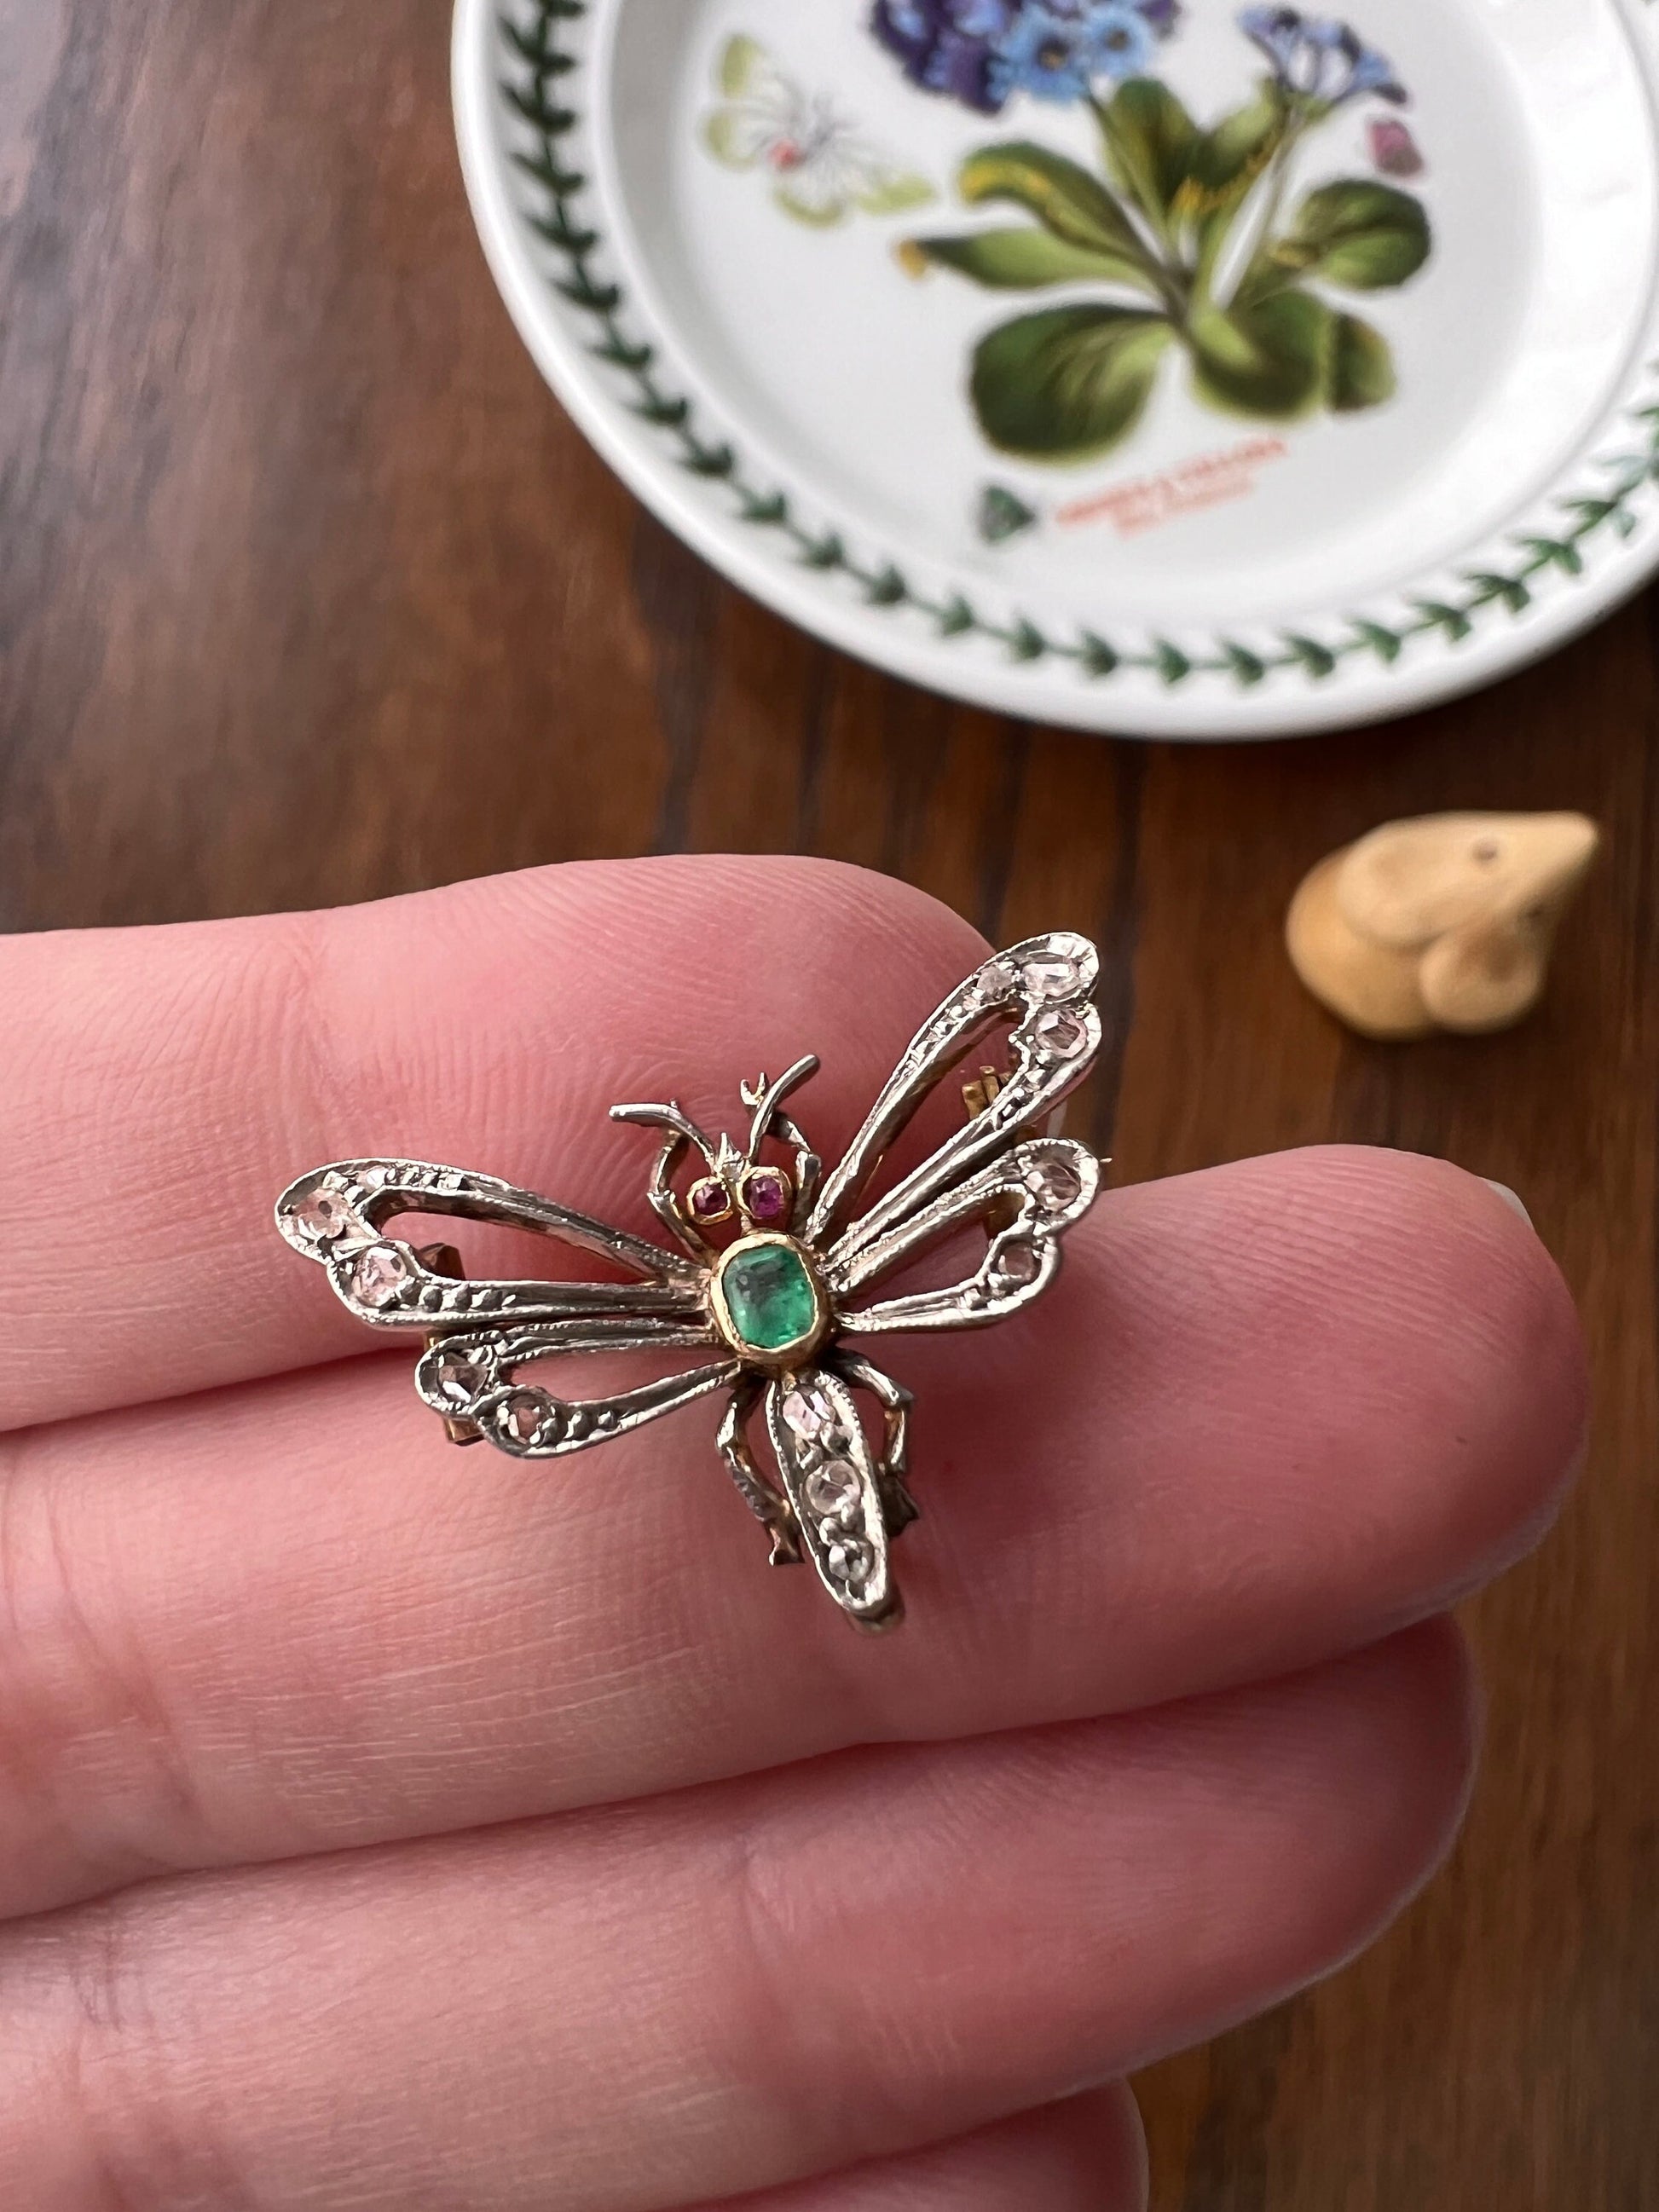 Dragonfly BUG Fly Bee French Antique Victorian Figural Pendant Emerald Rose Cut DIAMOND Ruby 18k Gold Silver Figural Wings Unique Gift Green